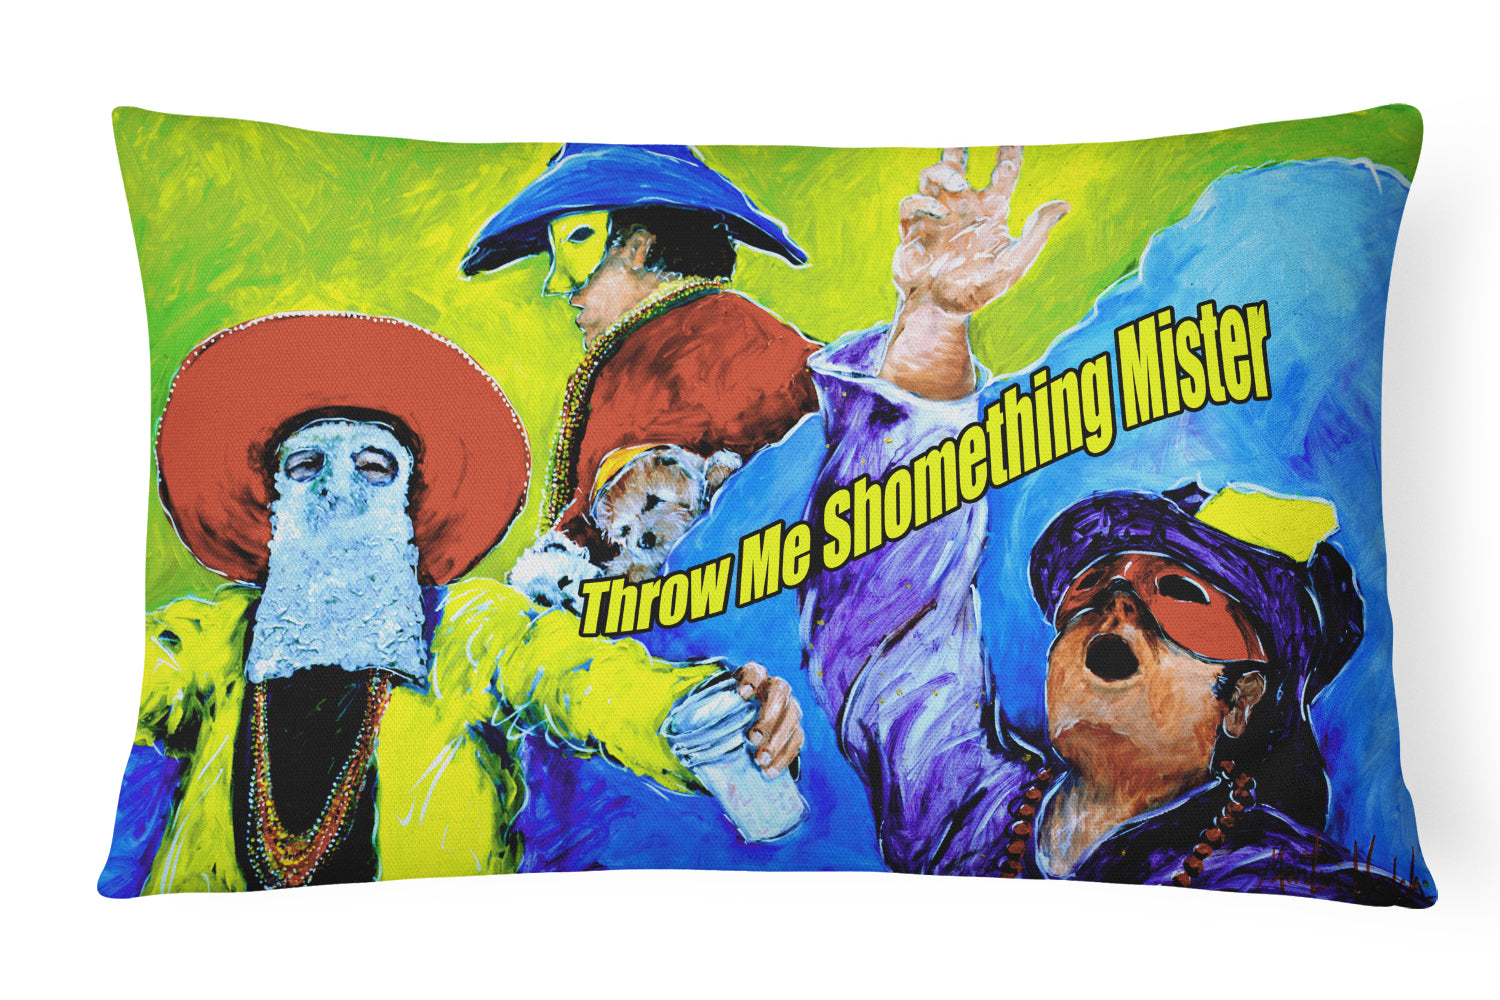 Buy this Mardi Gras Throw me something mister Canvas Fabric Decorative Pillow